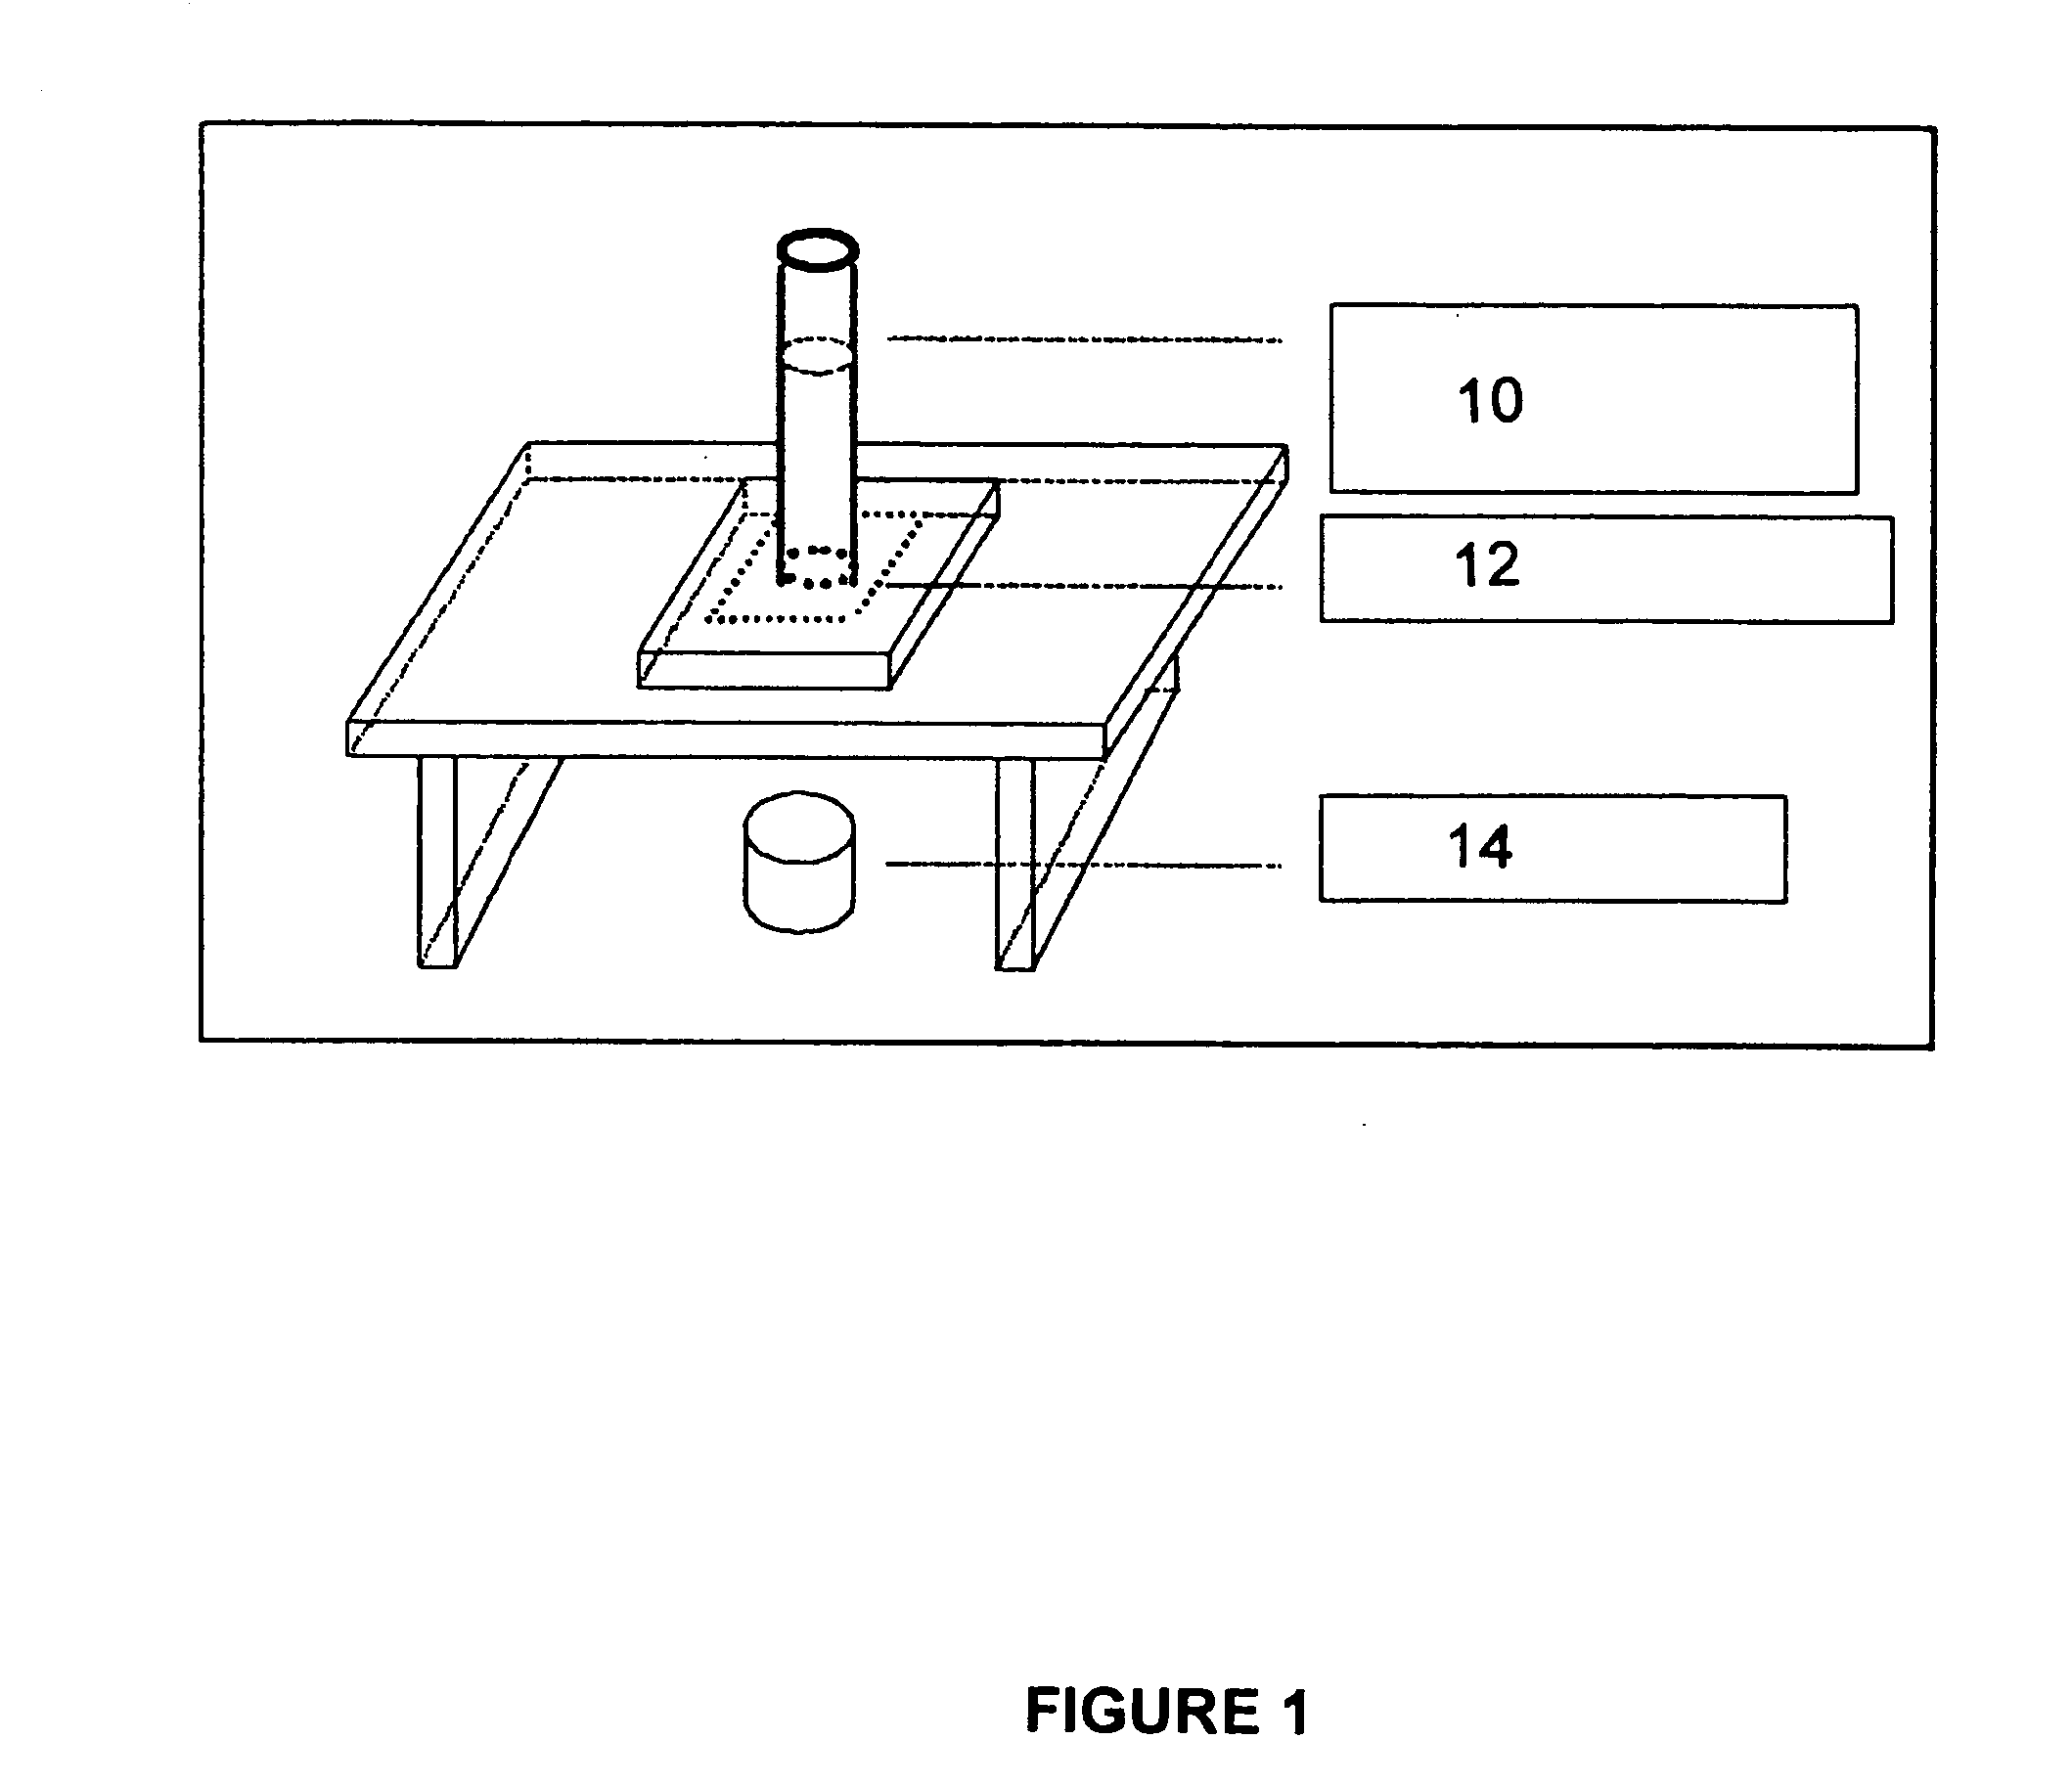 Tissue engineered scaffolds and mehtods of preparation thereof